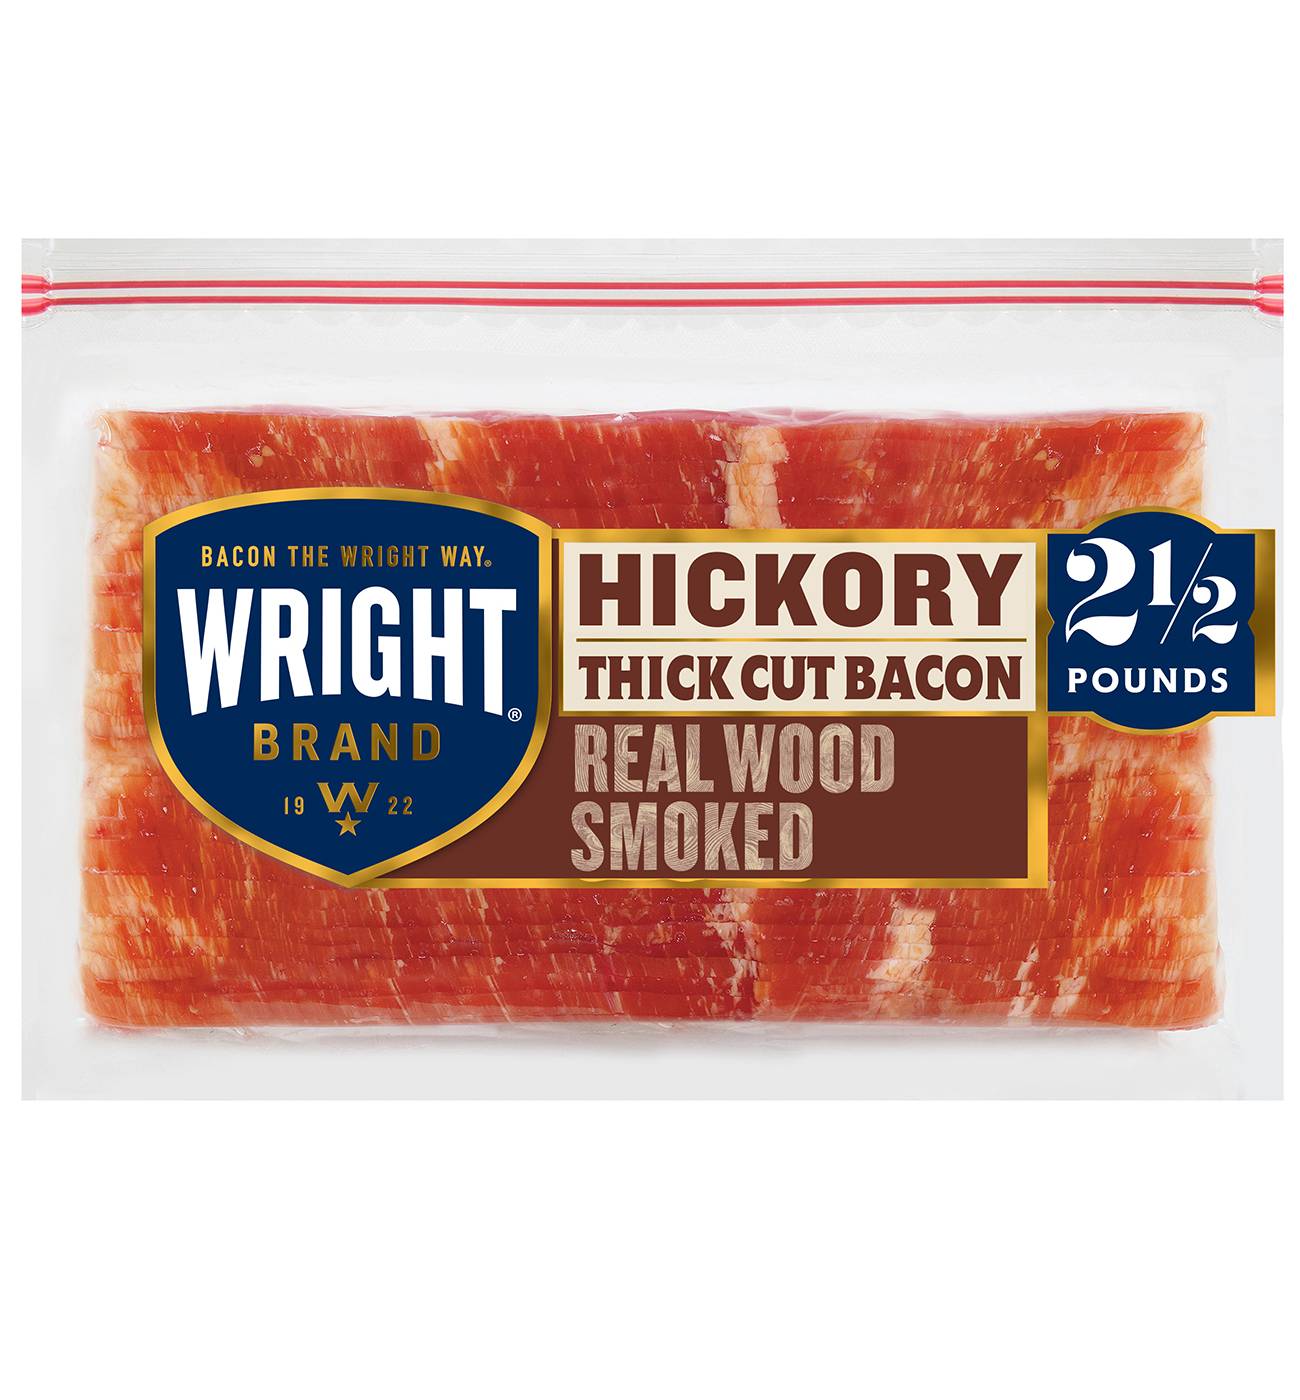 Wright Brand Hickory Smoked Thick Cut Bacon; image 1 of 6